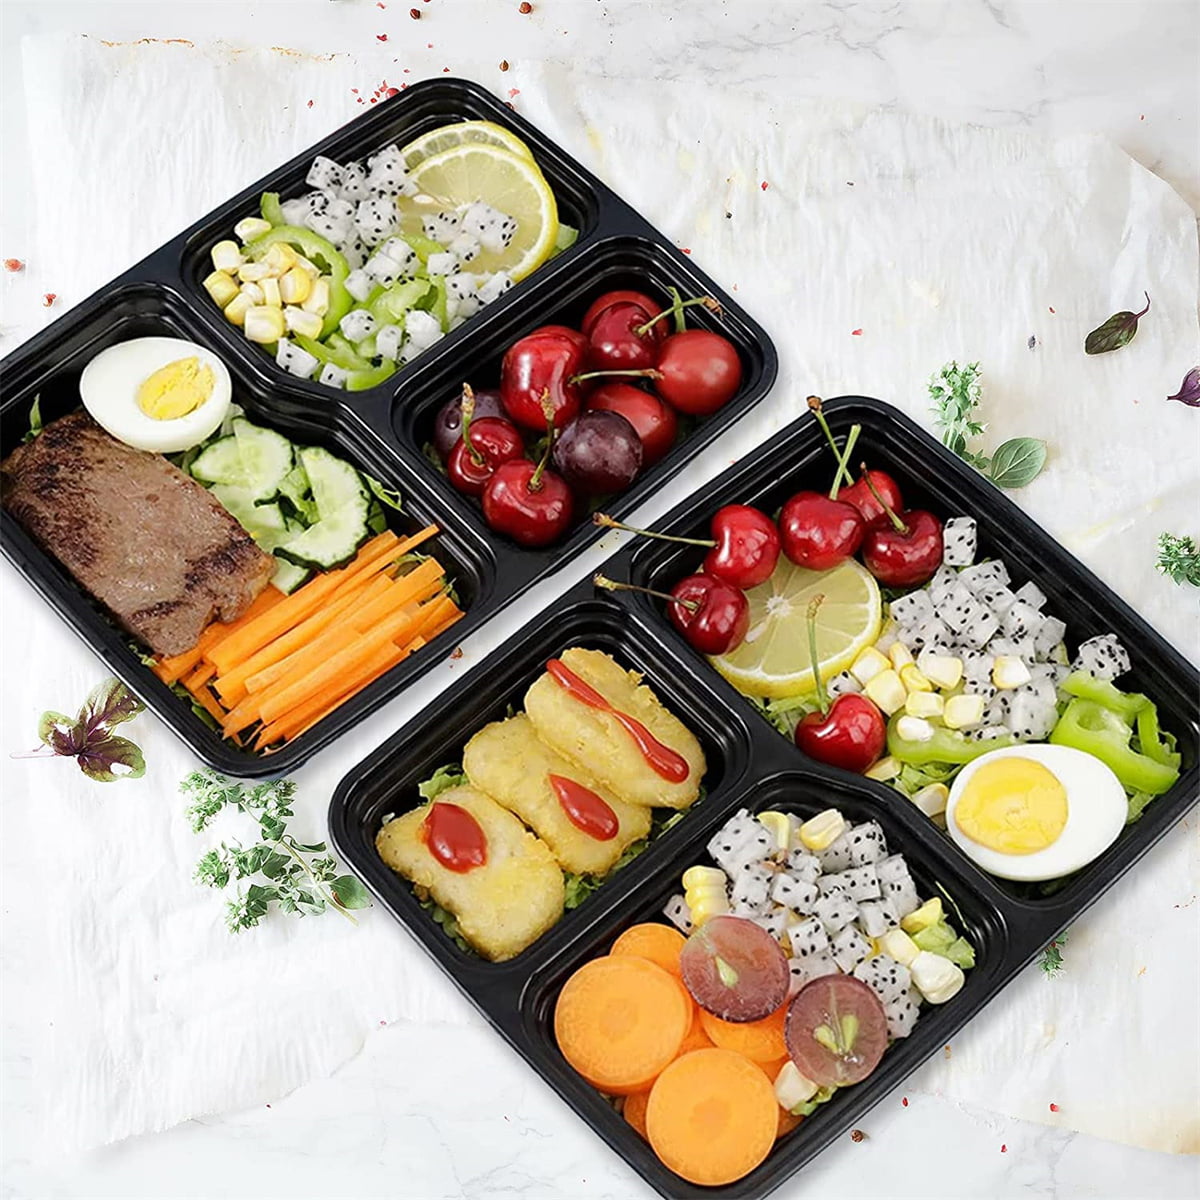 OTOR Bento Boxes Meal Prep Containers 3 Compartments with - Import It All